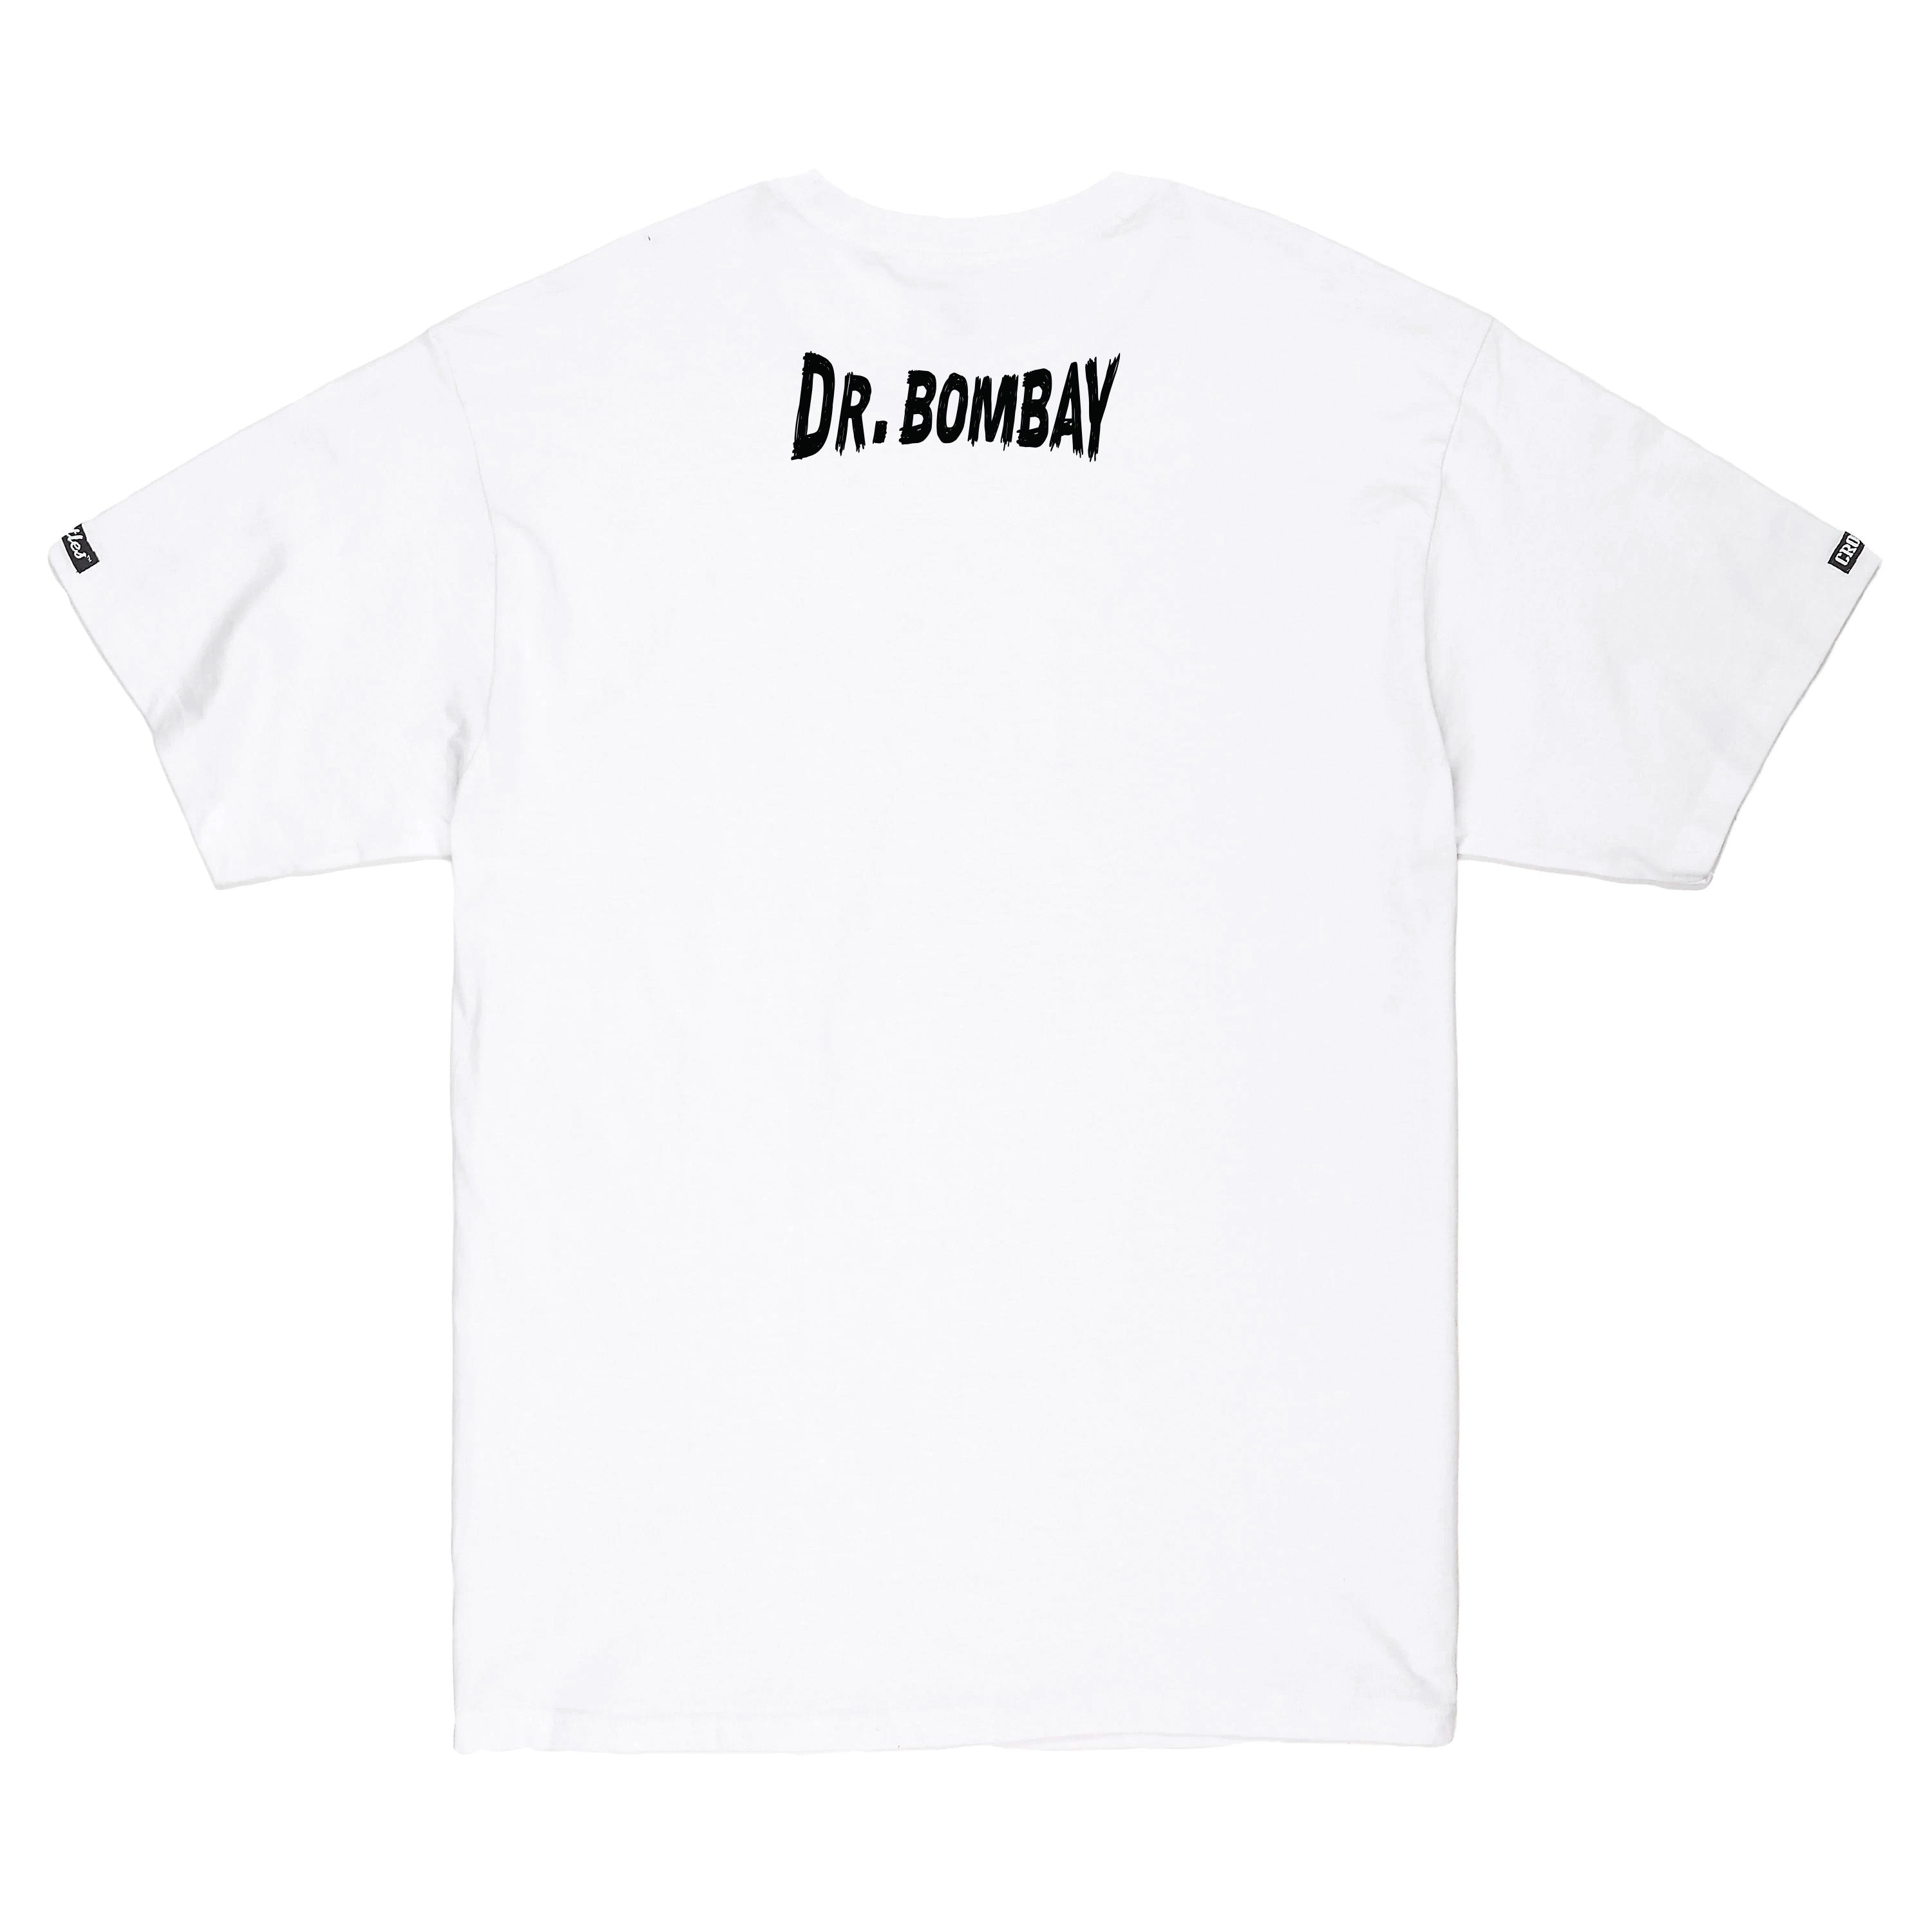 Dr. Bombay Silhouette Tee White